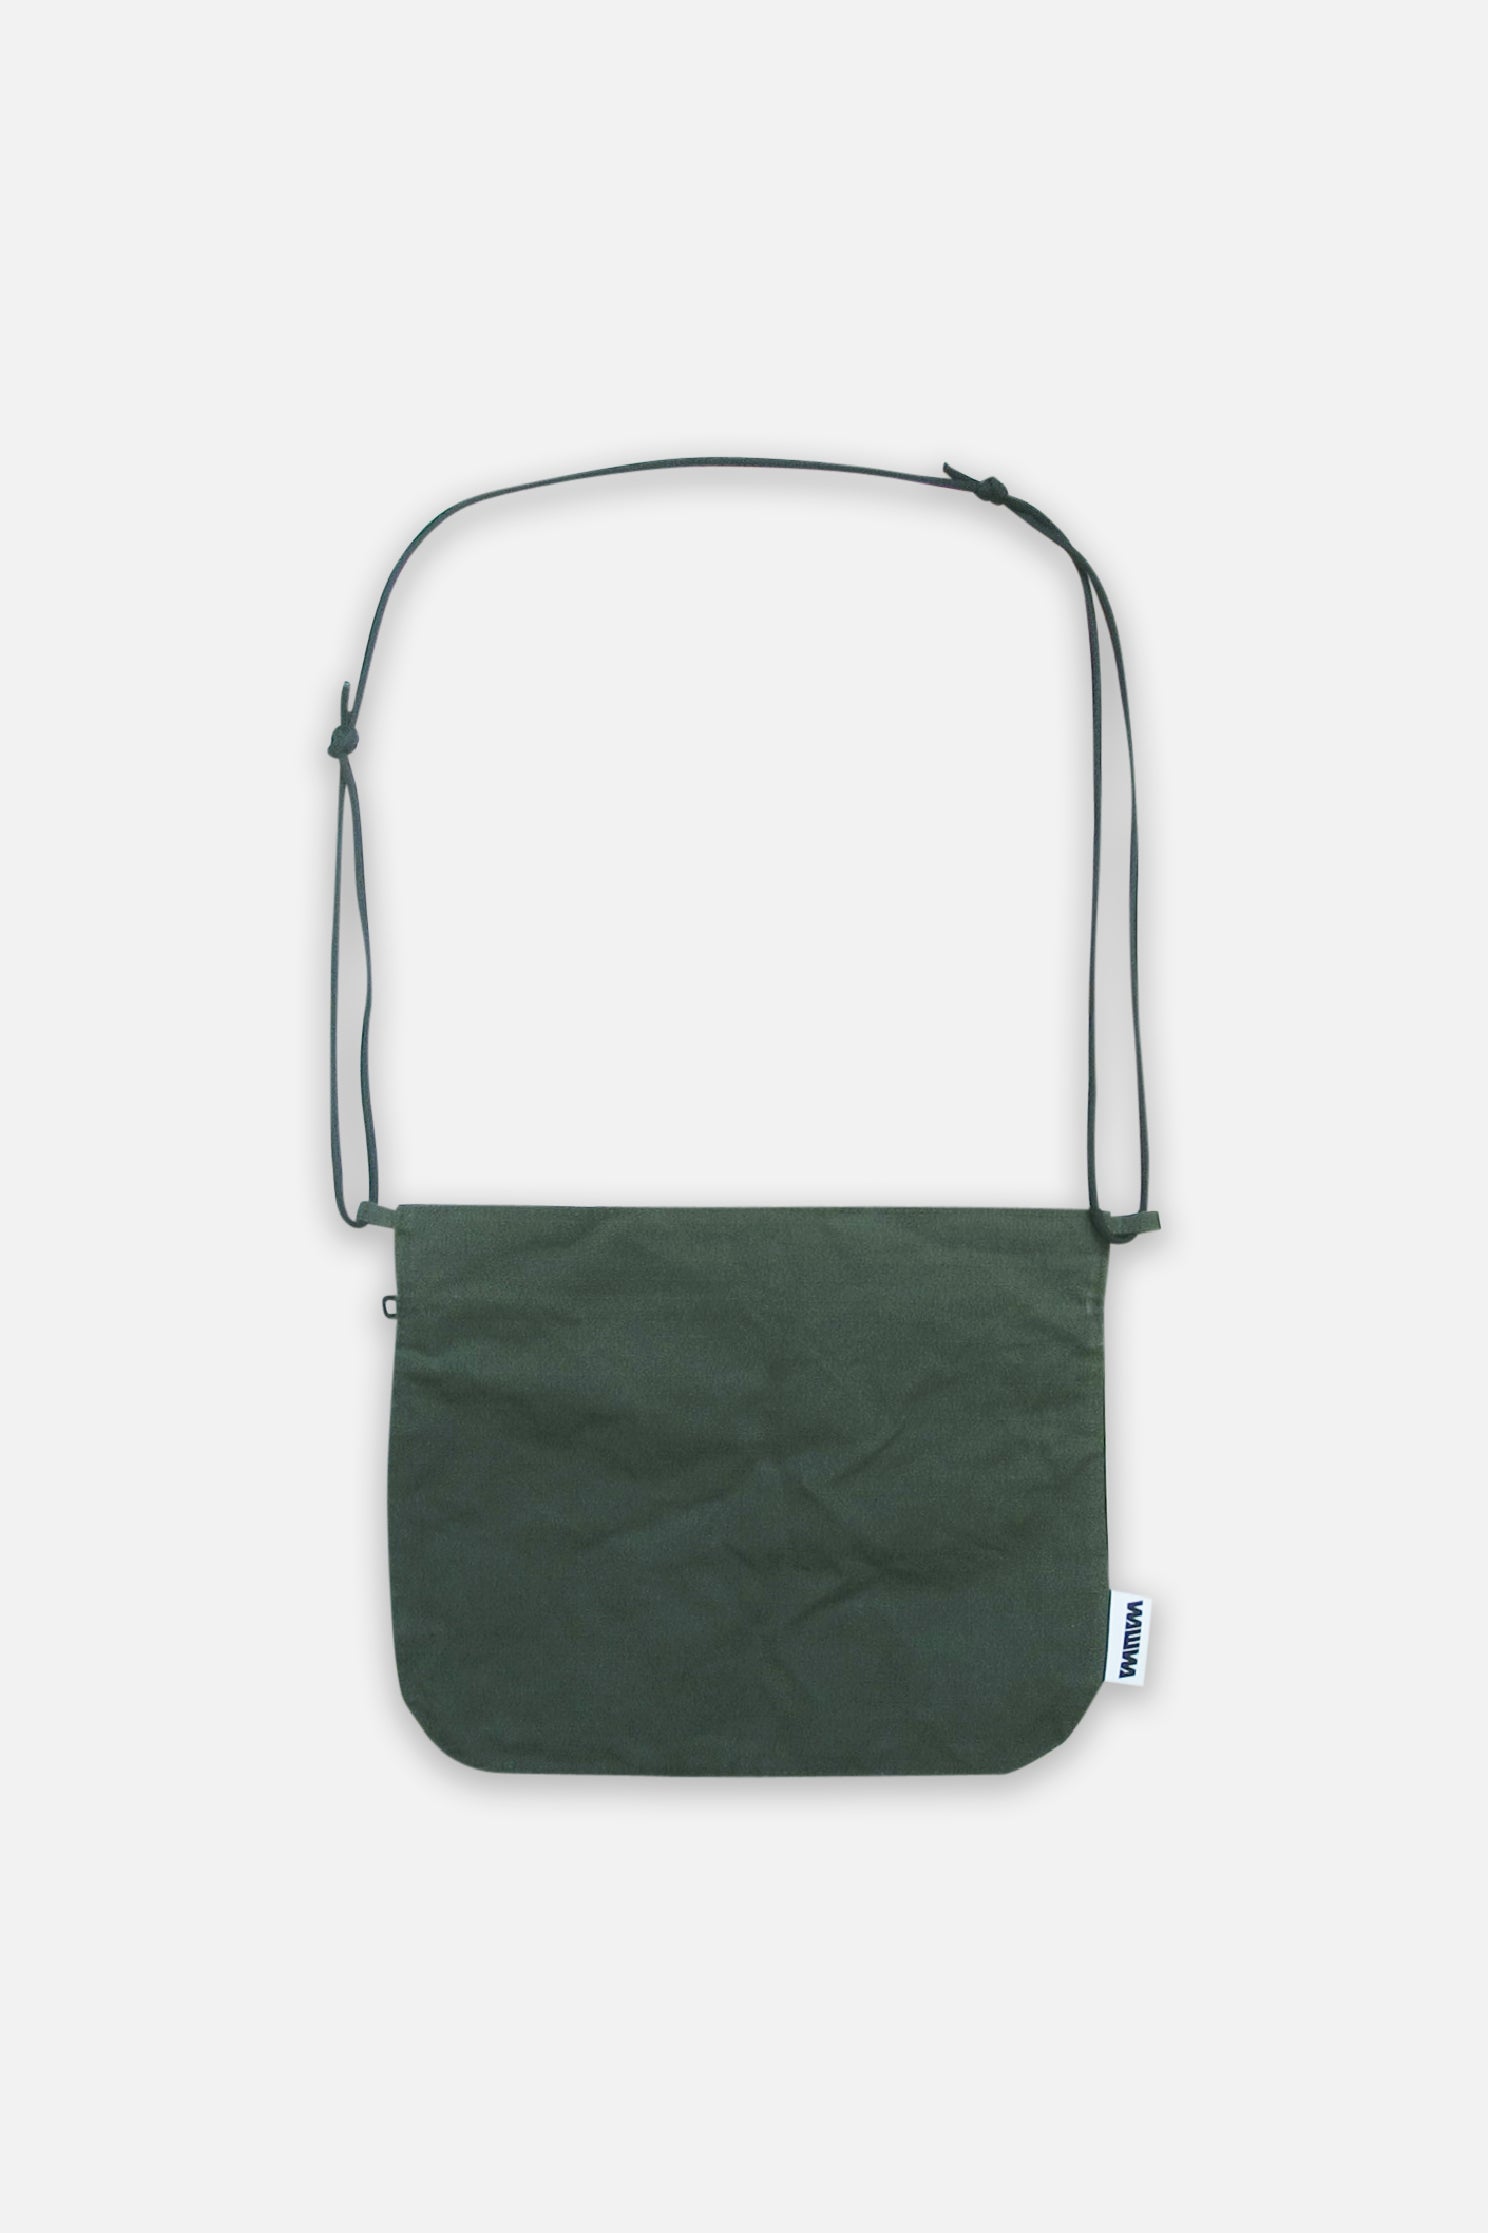 Stone Mountain green leather bag - clothing & accessories - by